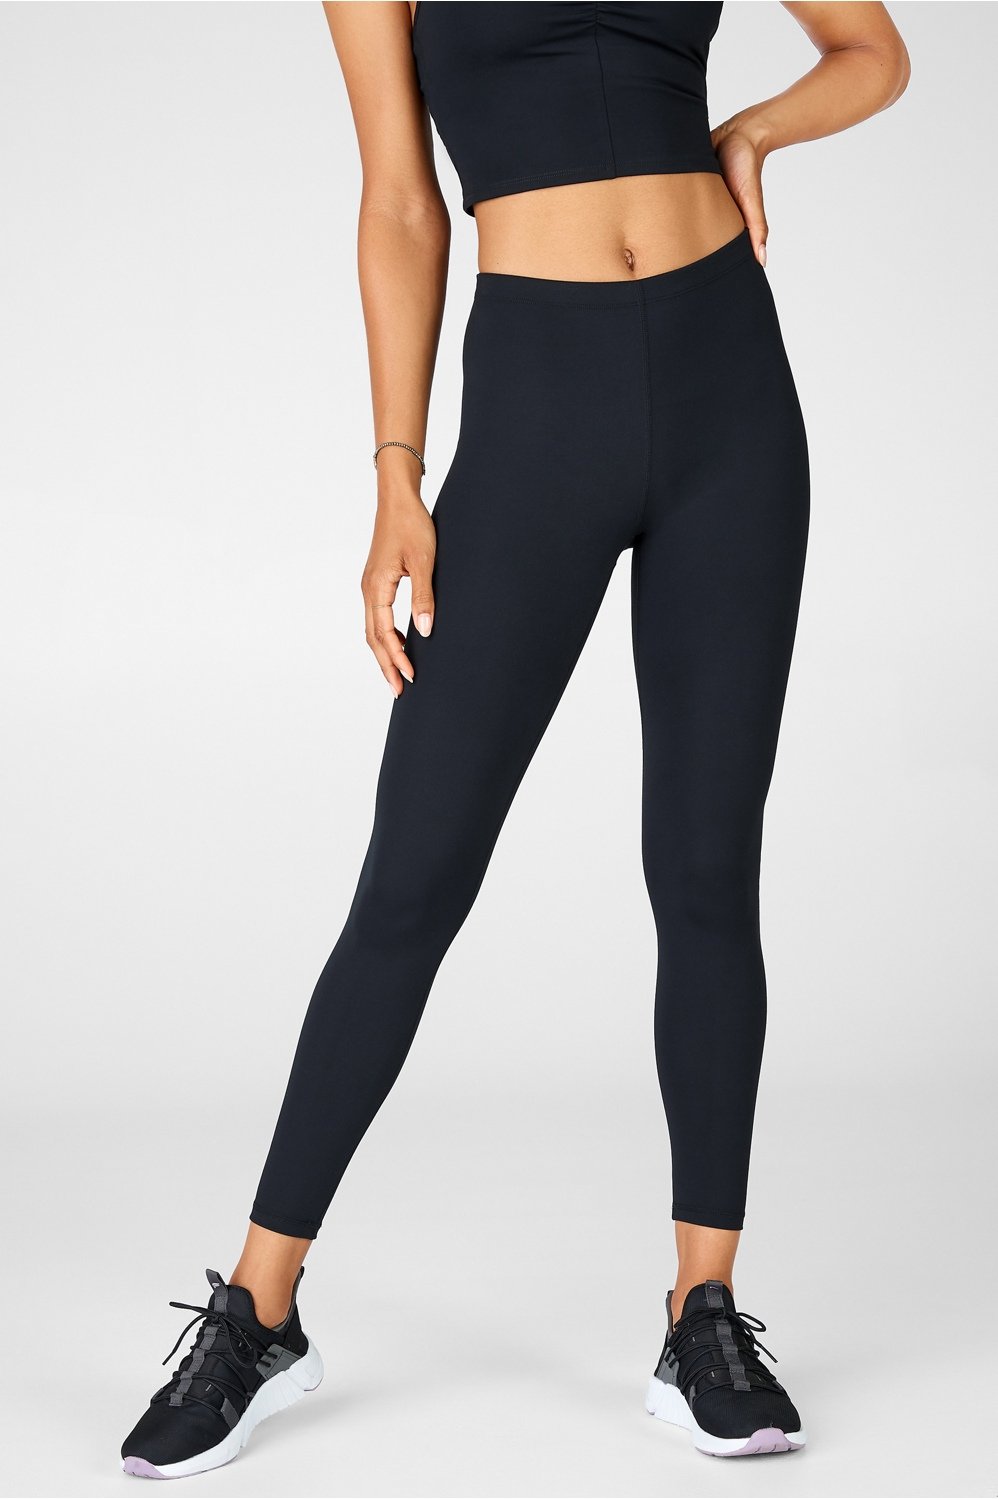 Fabletics, Pants & Jumpsuits, Fabletics Cashel Foldover Pureluxe High  Rise Ruched Cinched Leggings In Espresso